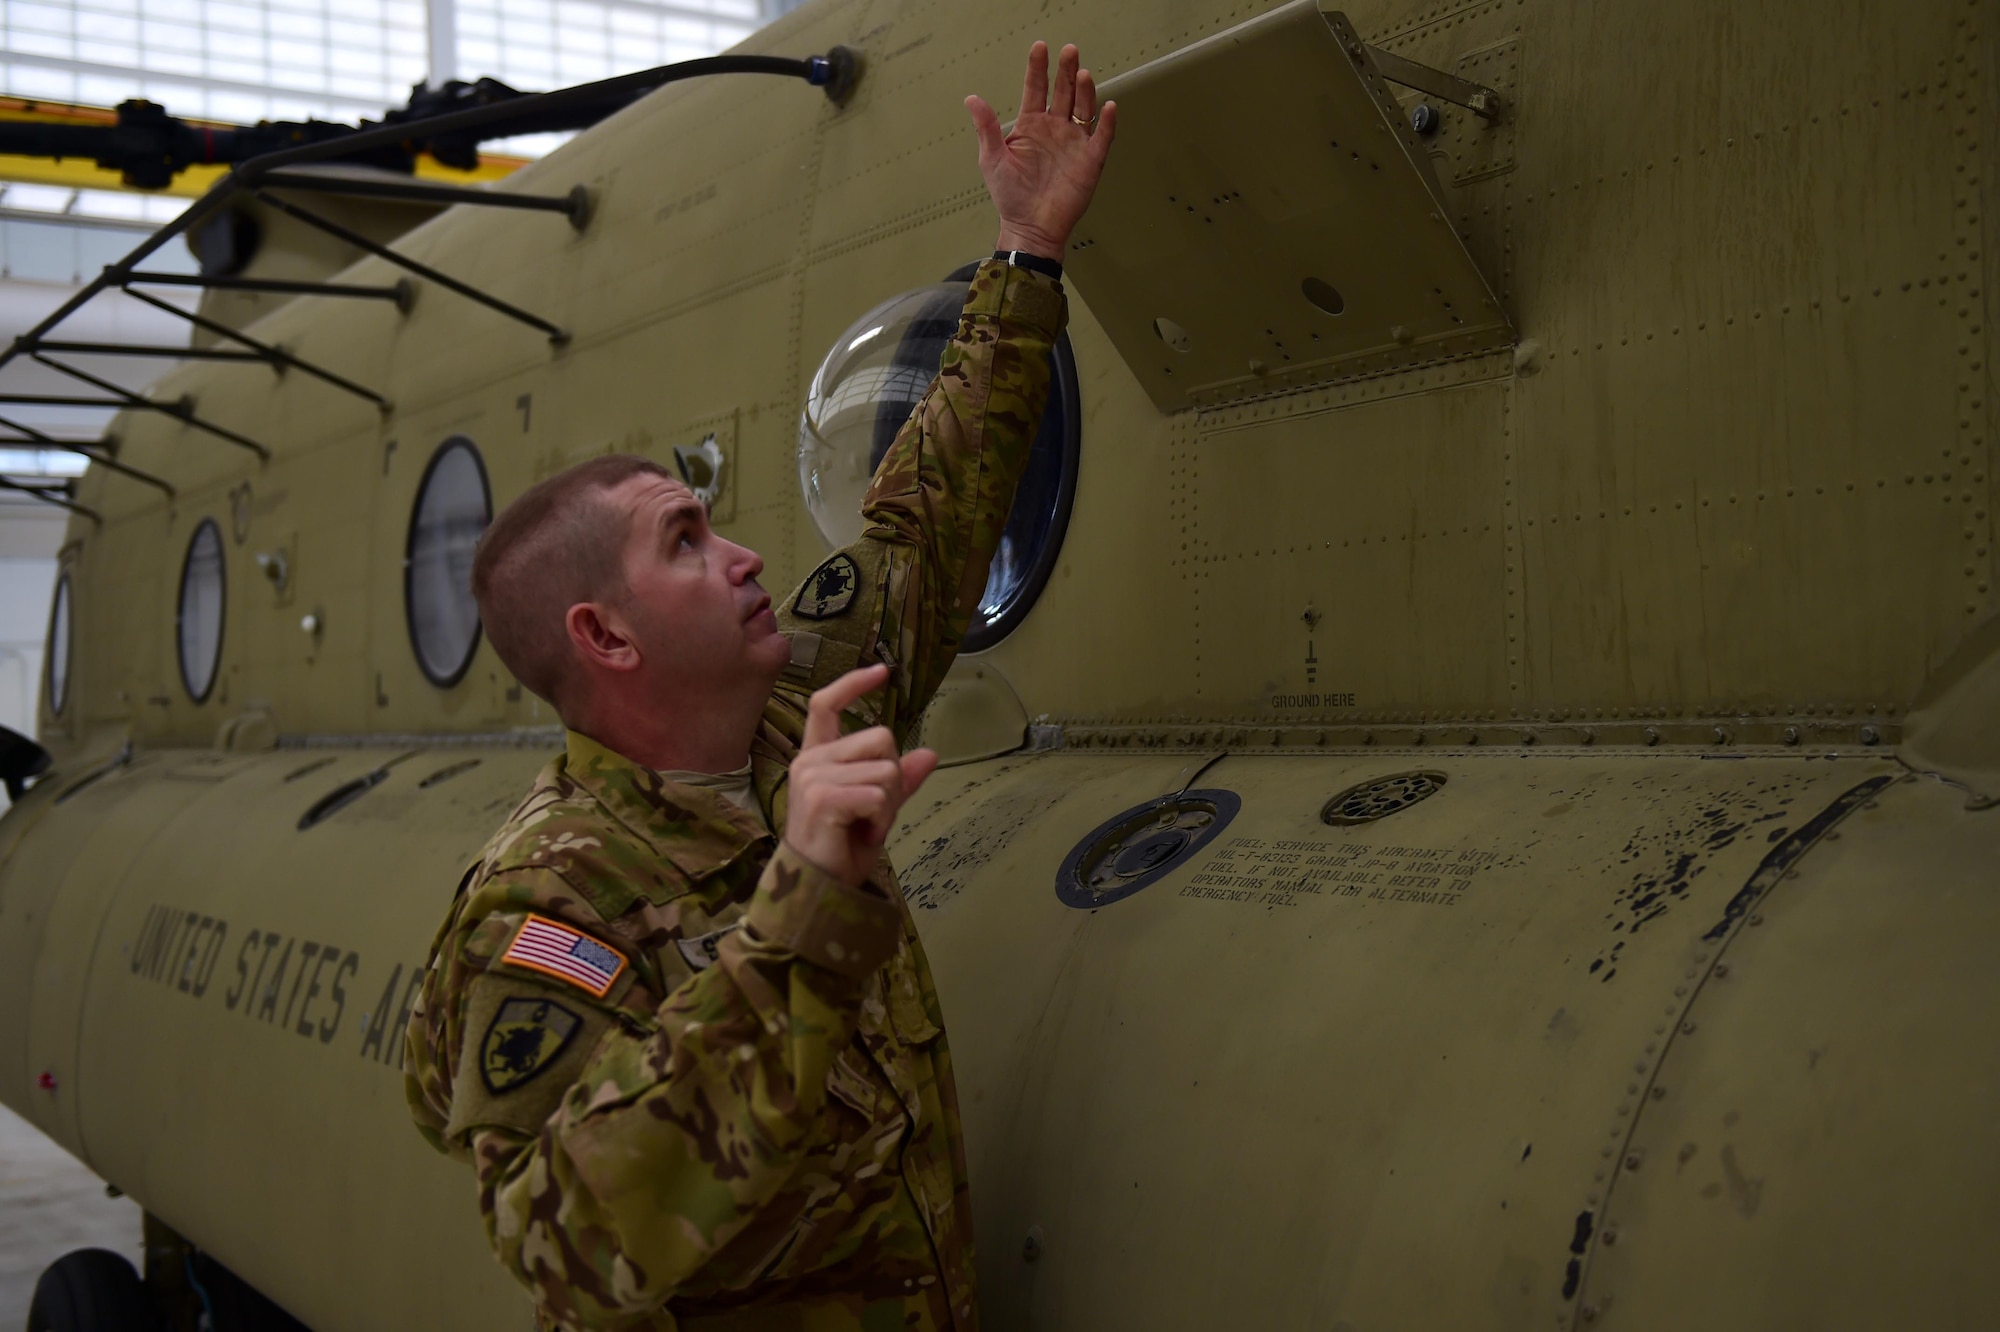 U.S. Army Staff Sgt. Wade Shore, Colorado Army National Guard CH-47 crew chief, inspects a panel on a CH-47 helicopter at the Army Aviation Support Facility on Buckley Air Force Base, Colo., March 3, 2016. A Boeing Ch-47 Chinook has many components on the outside that the crew chief is responsible for. (U.S. Air Force photo by Airman 1st Class Gabrielle Spradling/Released)